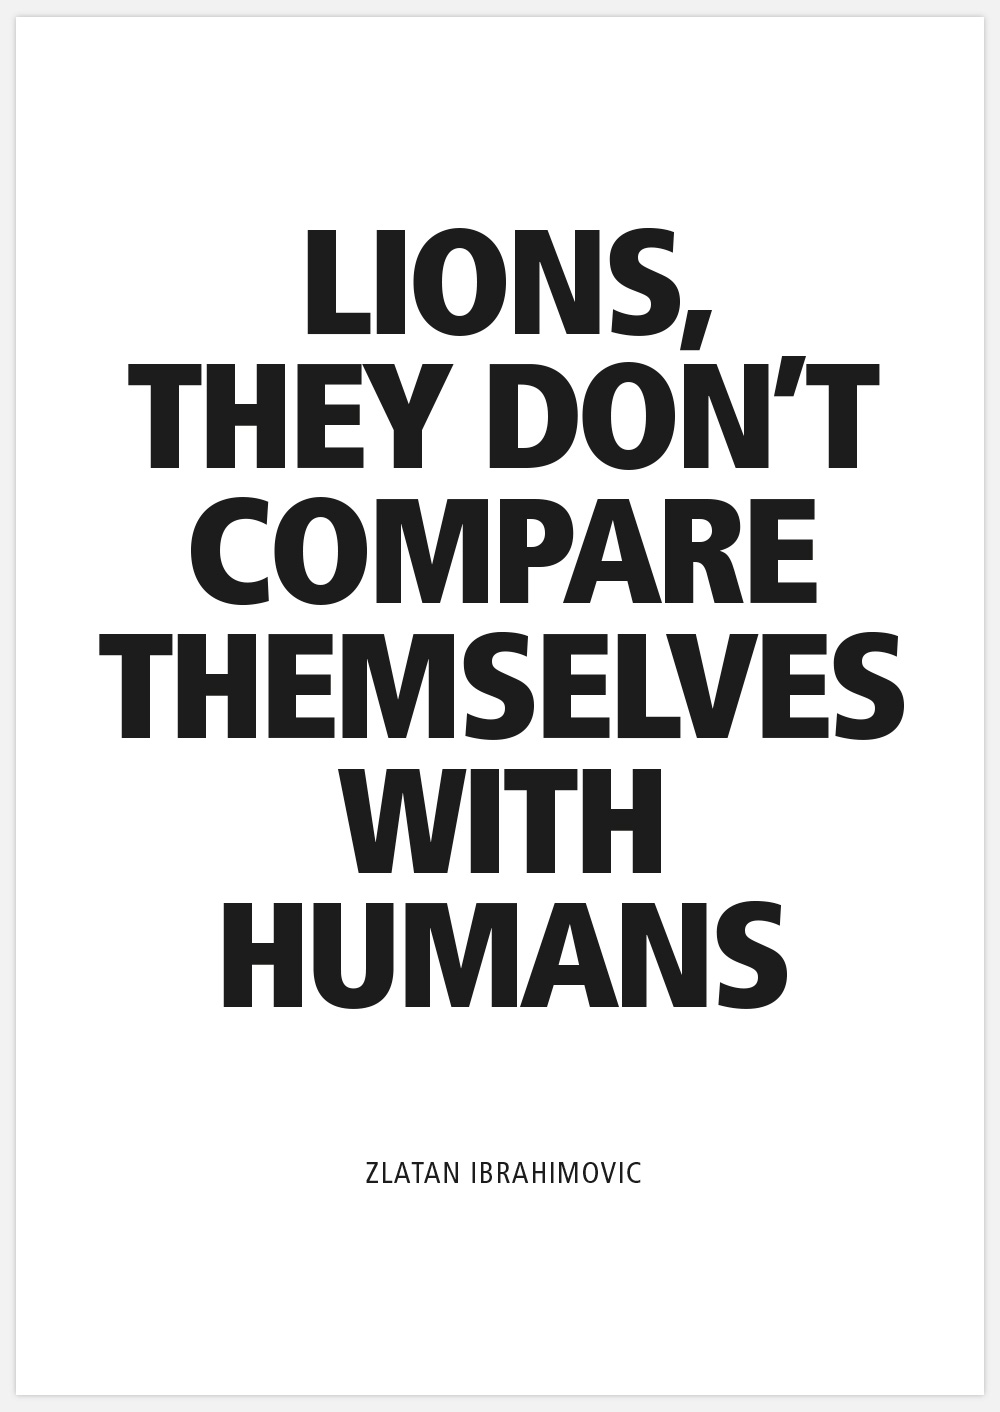 Lions they don't compare